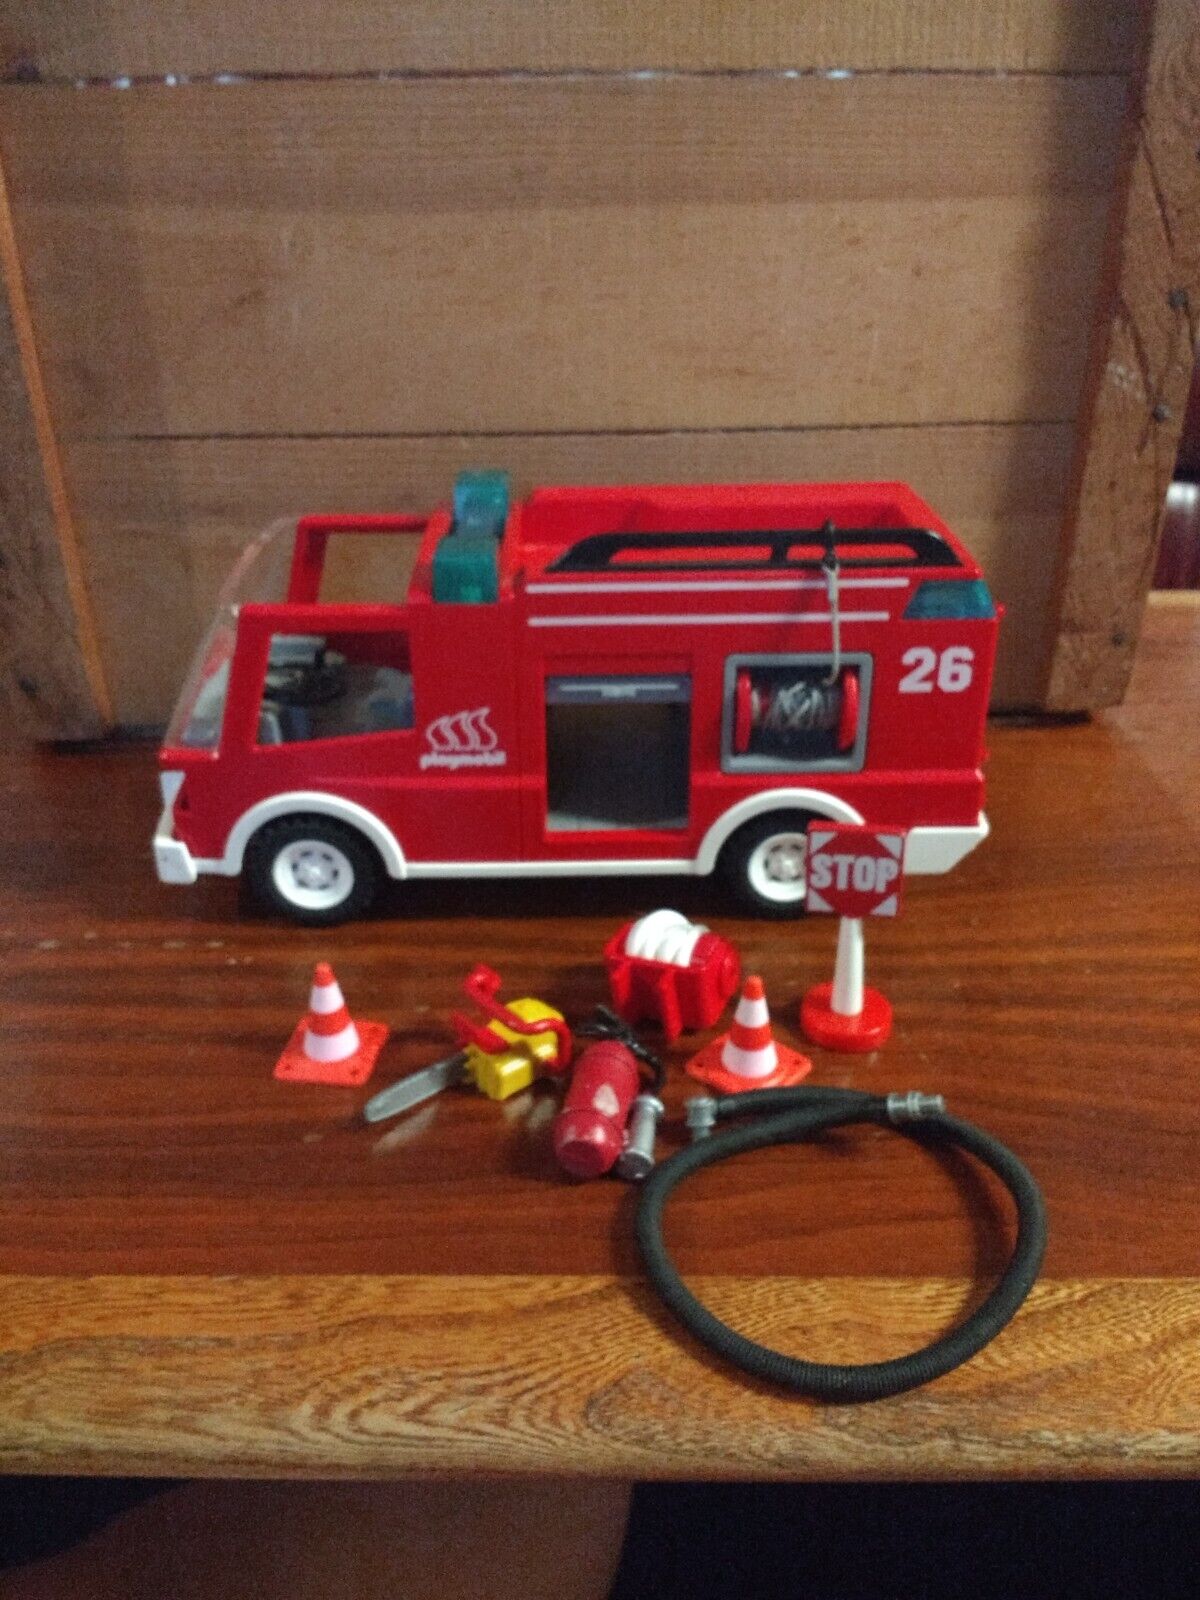 1996 Playmobile fire truck toy